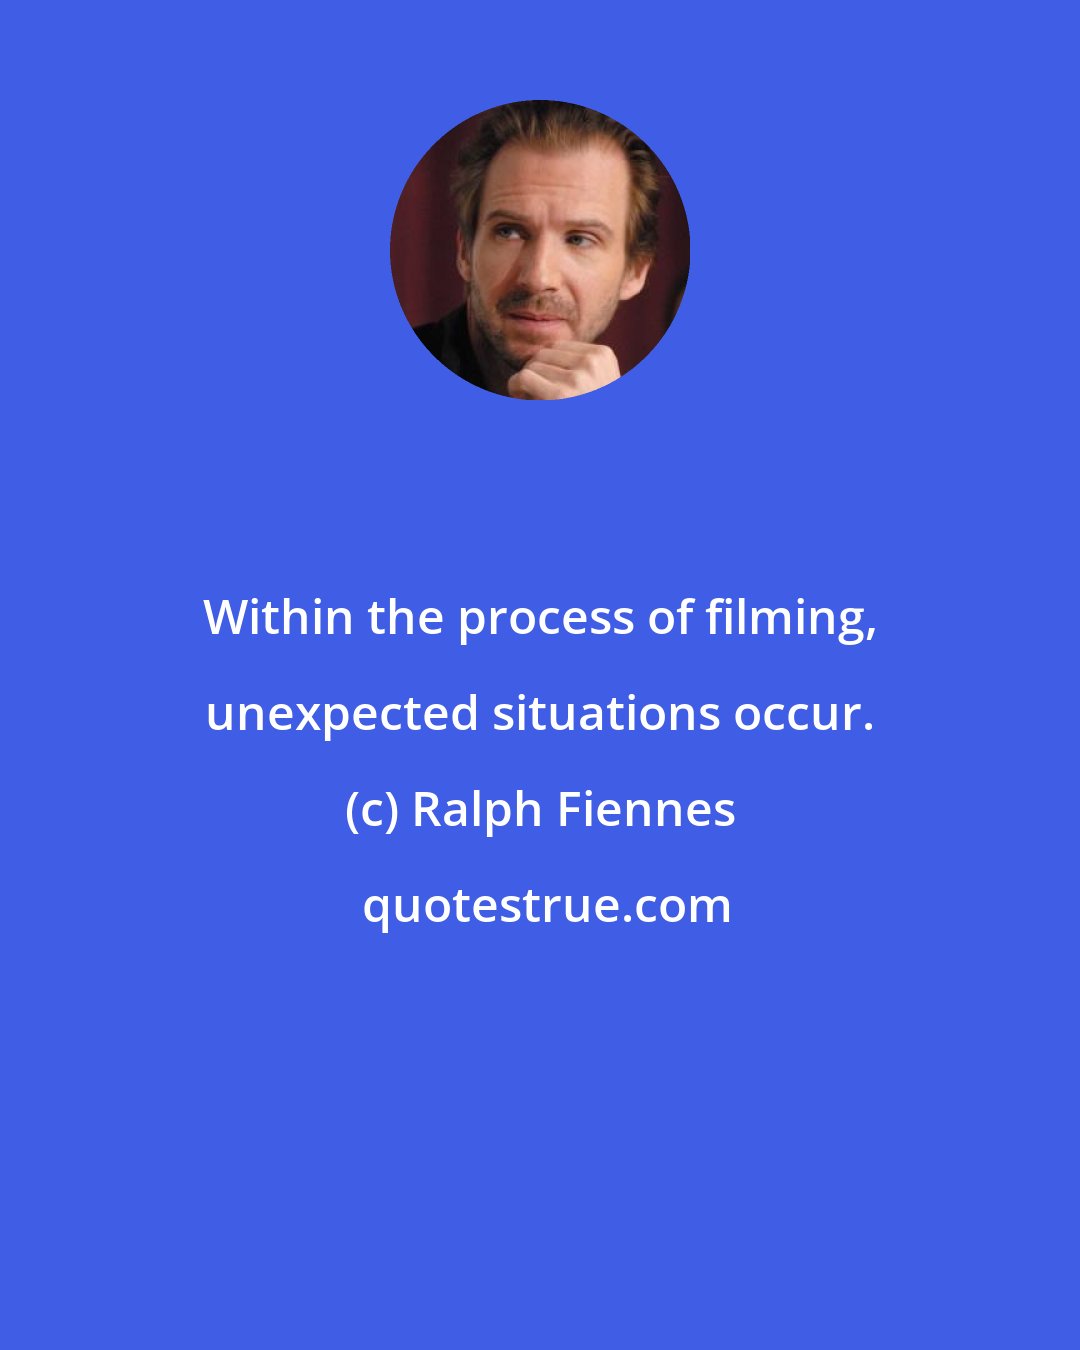 Ralph Fiennes: Within the process of filming, unexpected situations occur.